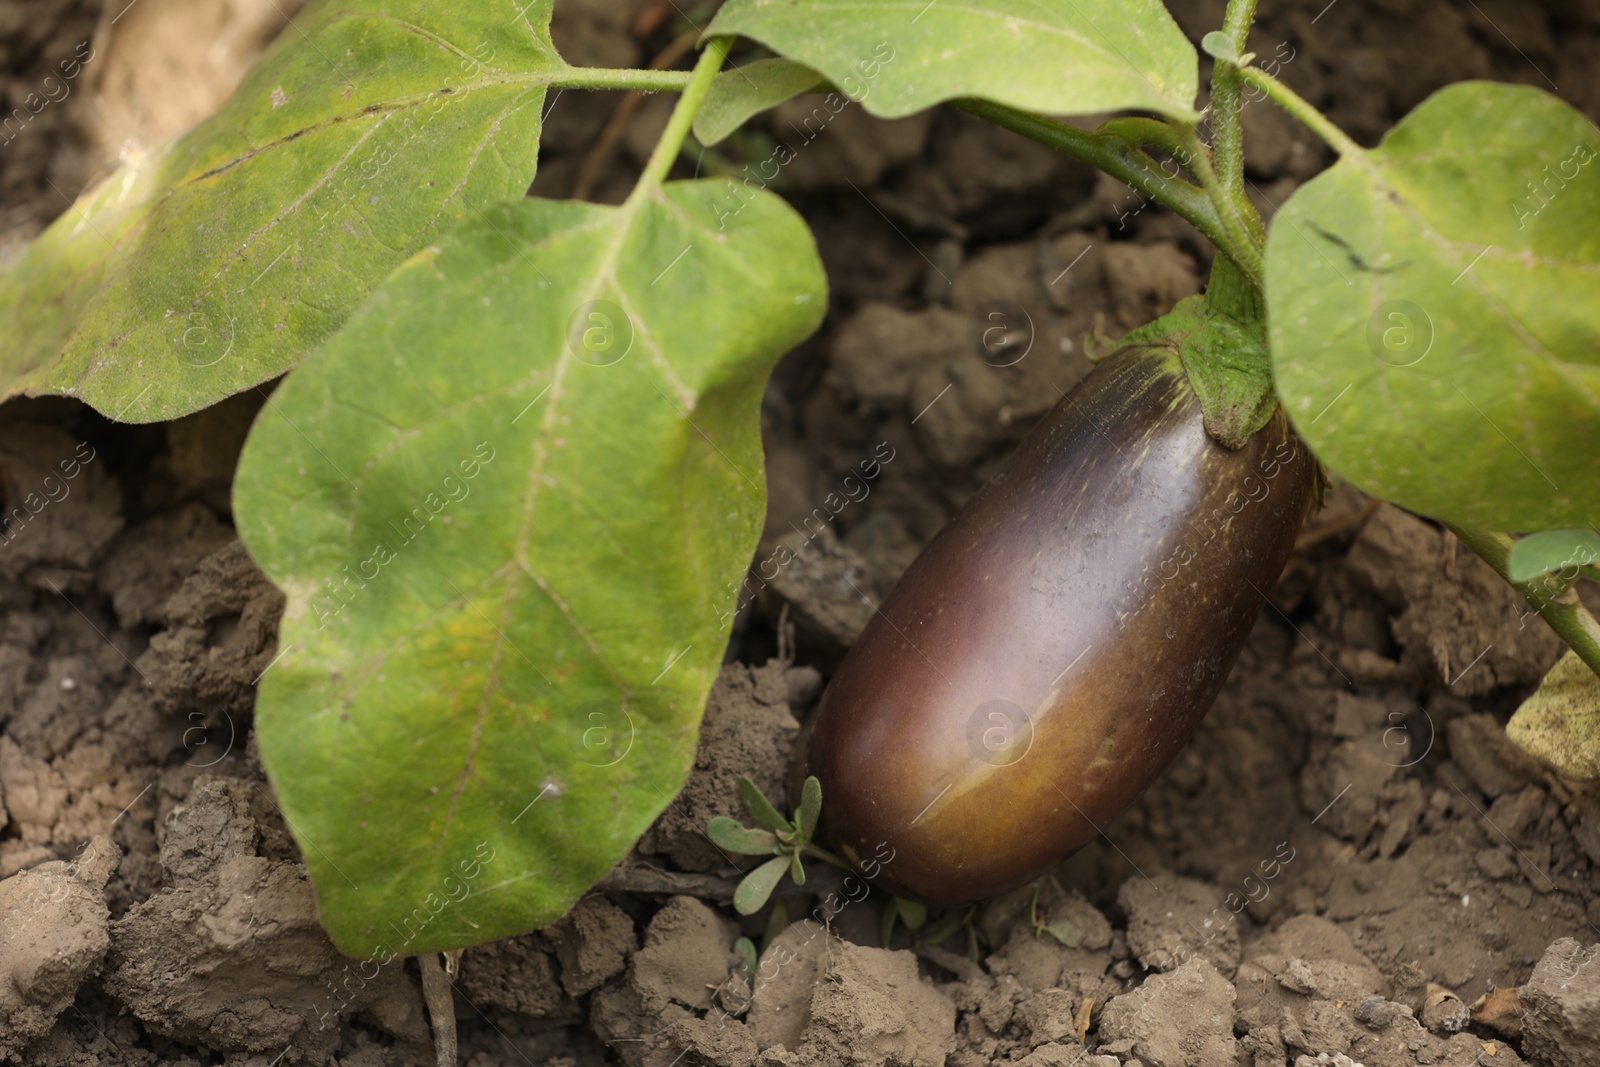 Photo of One small eggplant growing on stem outdoors